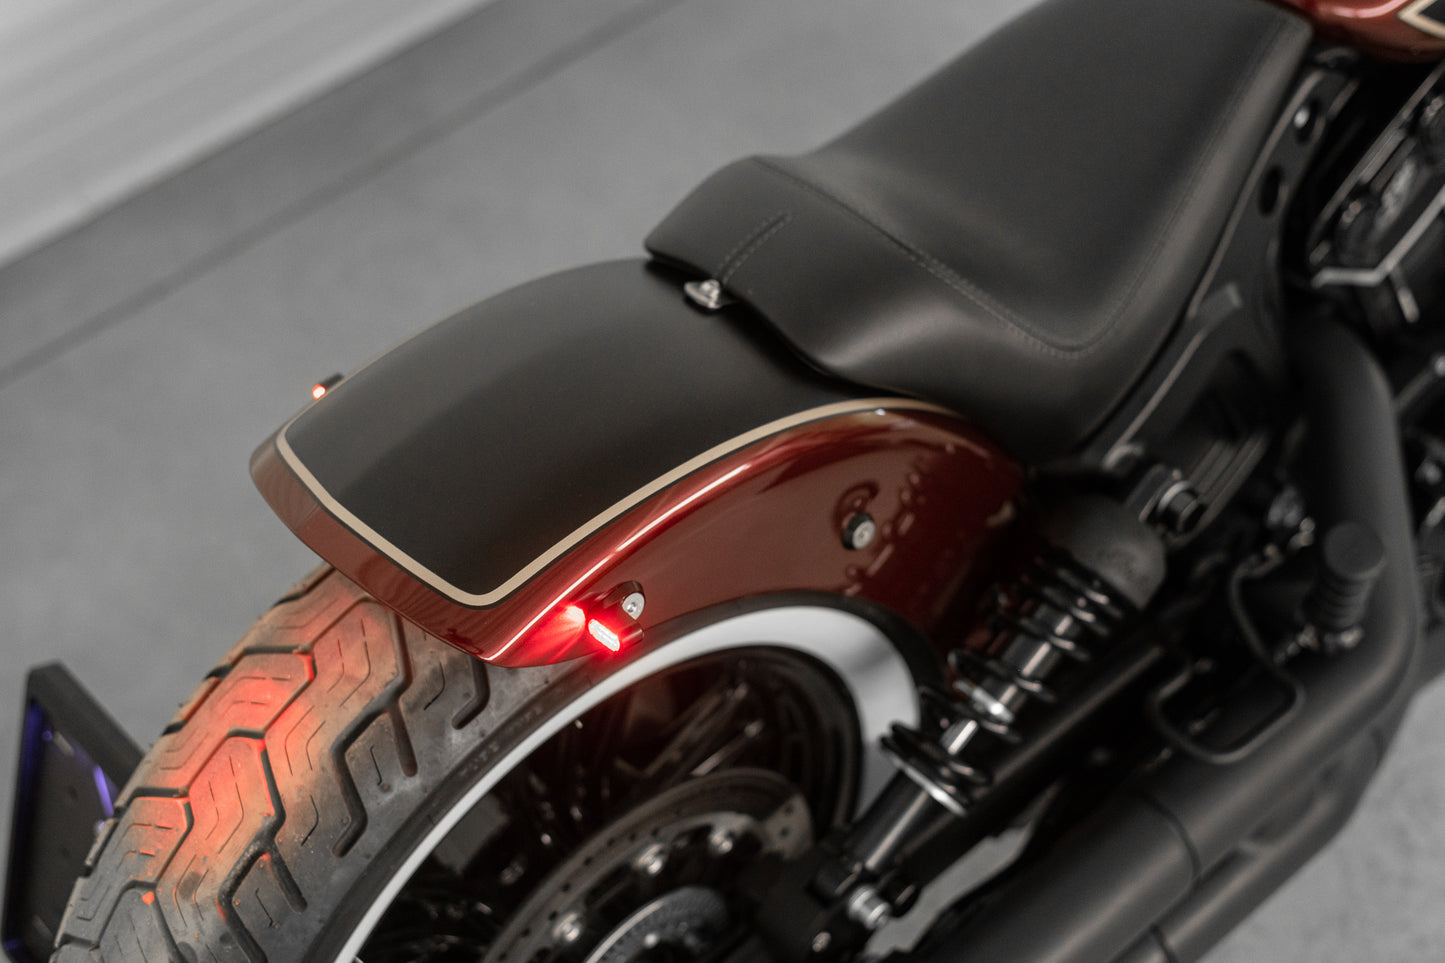 Zoomed Harley Davidson motorcycle with Killer Custom "Tomahawk" rear fender from above grey background